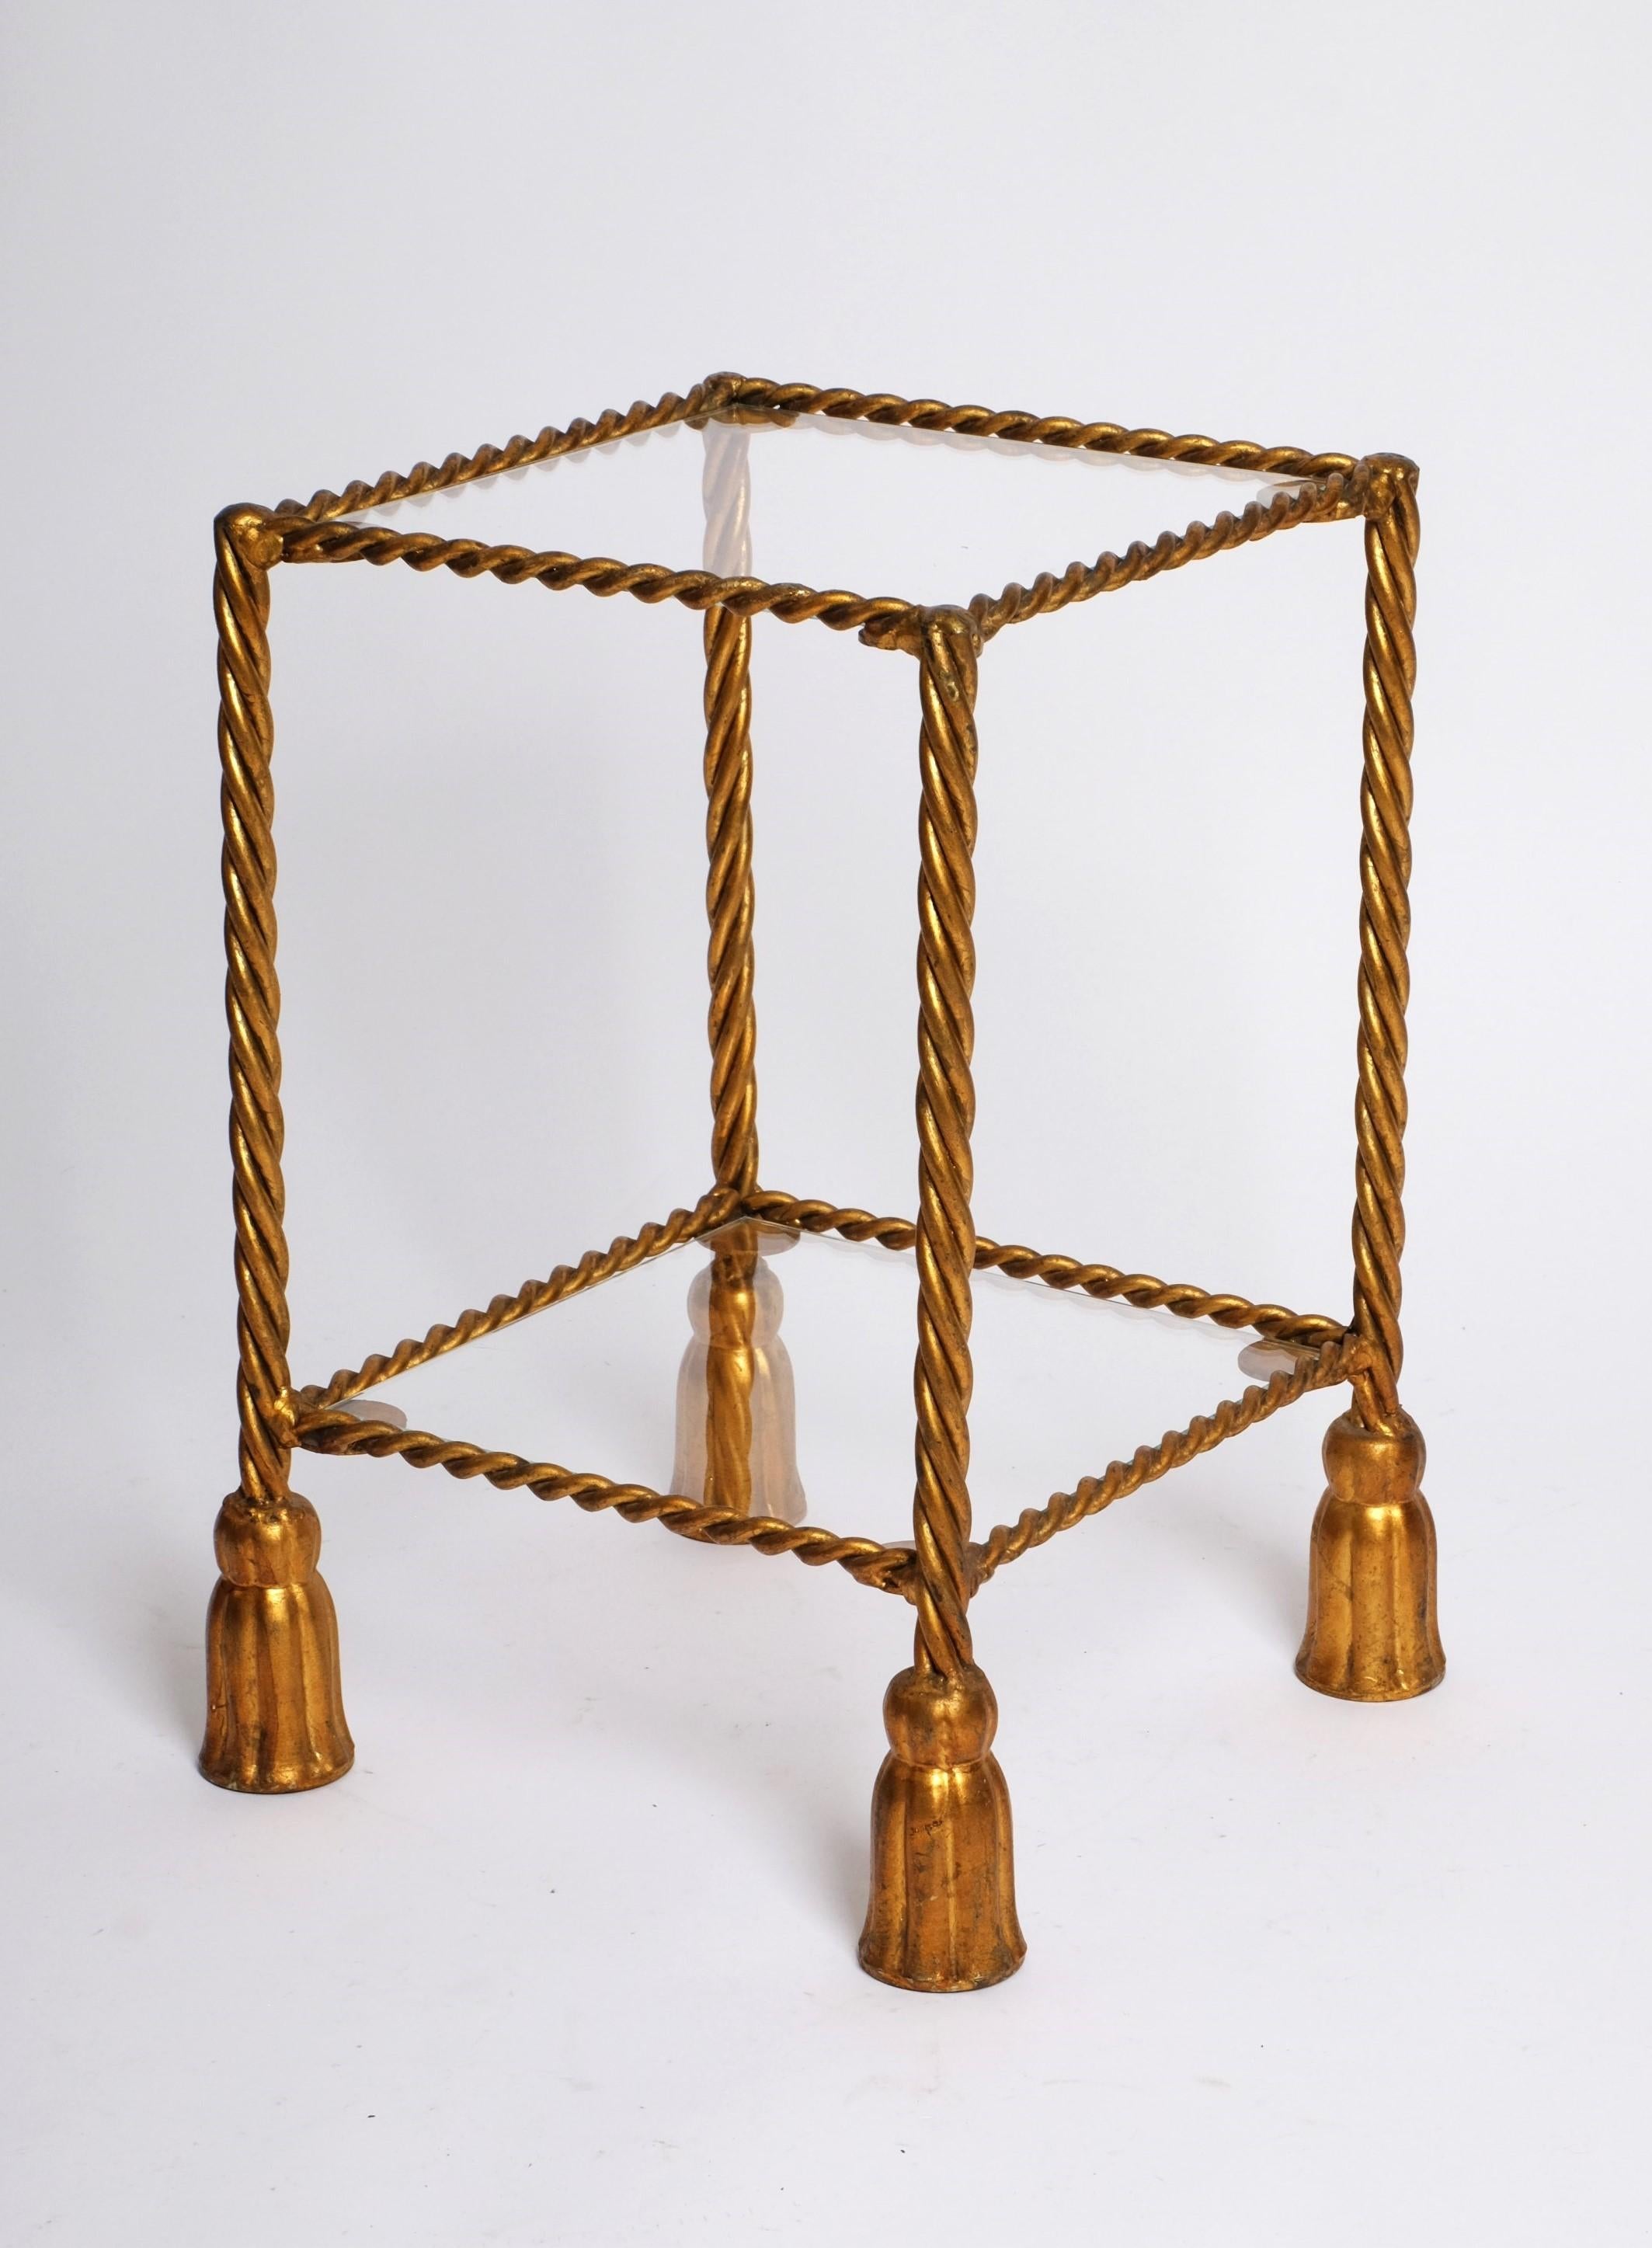 Vintage Hollywood Regency etagere or side table attributed to Li Puma with square glass top and lower shelf. Stands on four gilt metal legs with faux twisted rope ending in tasseled feet (1960s). Beautiful design from the 1960s. Very